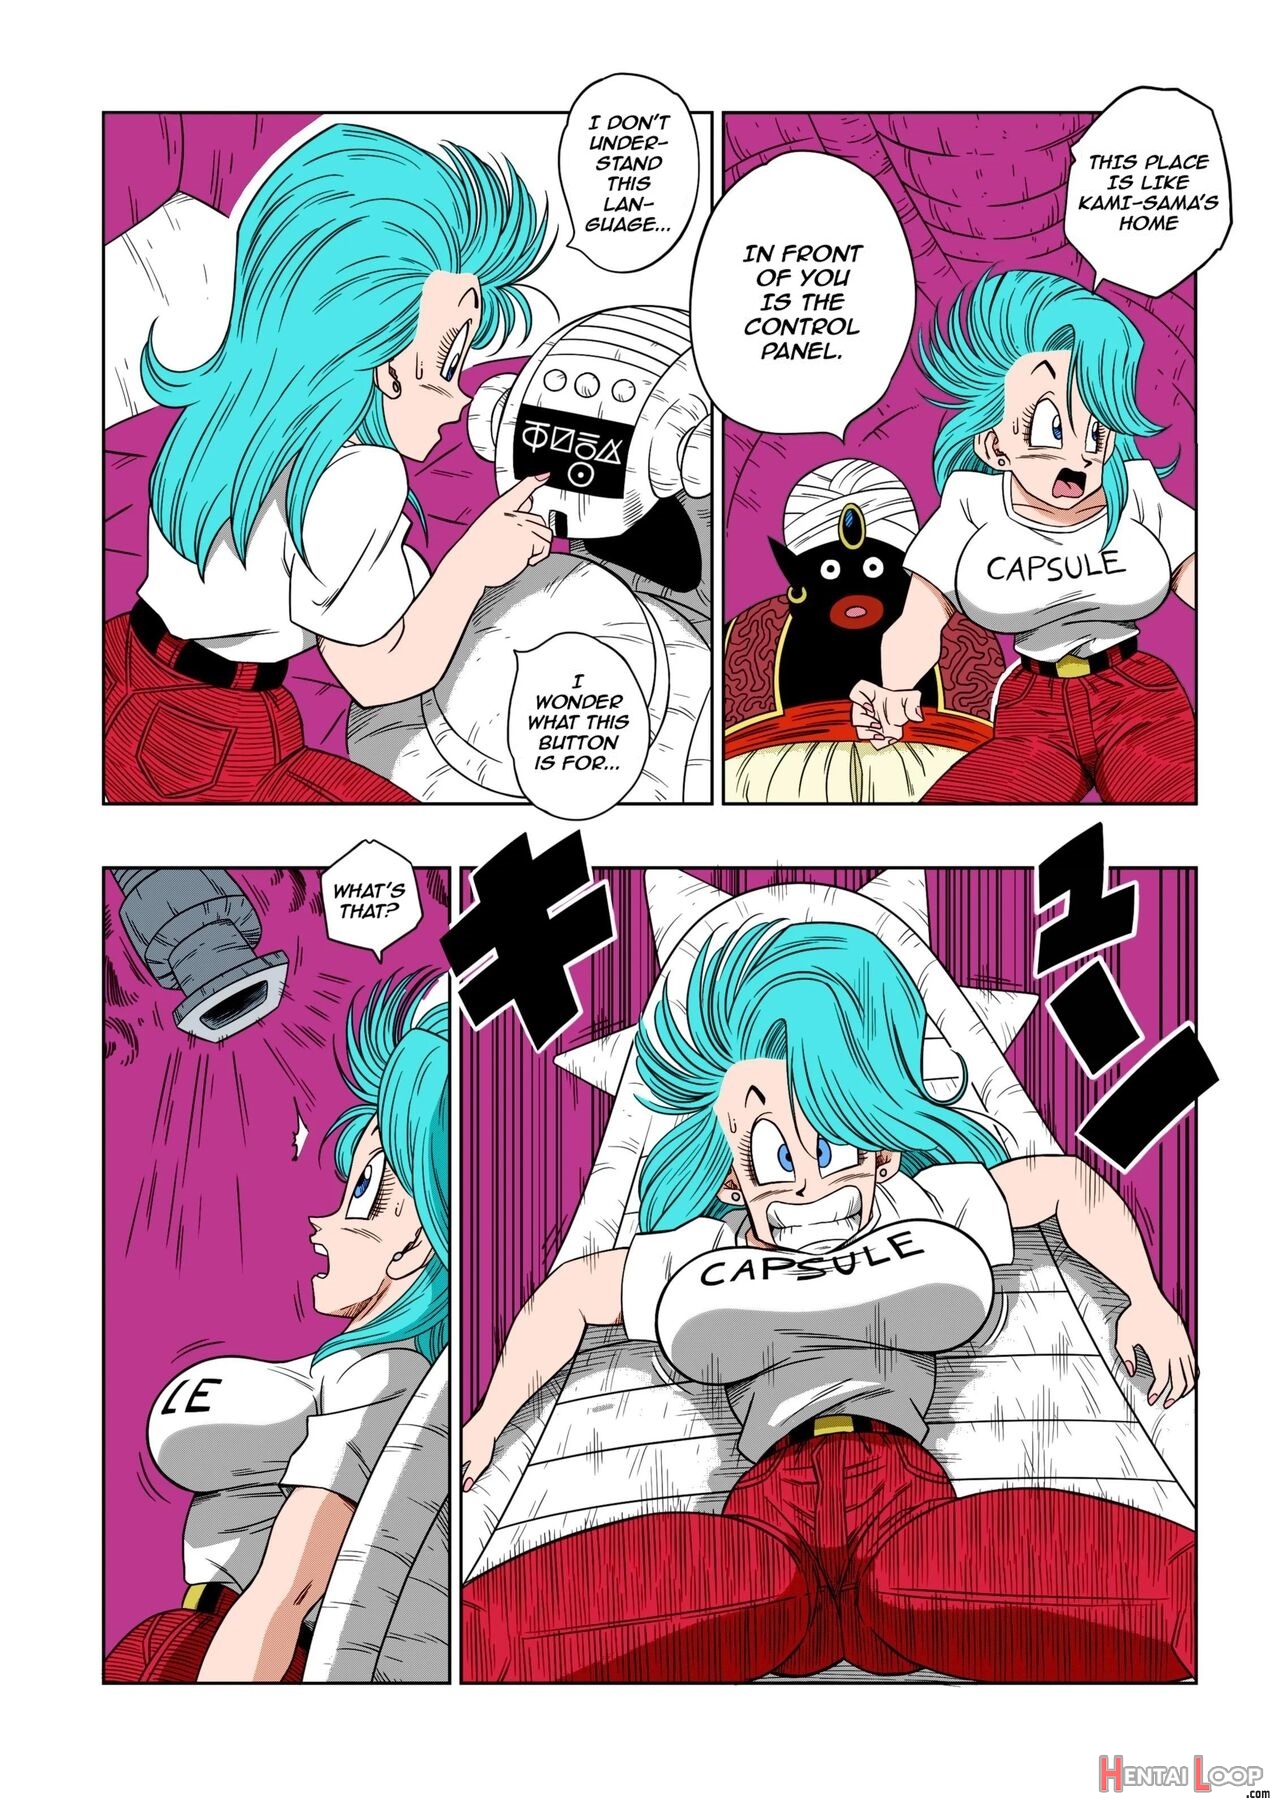 Dagon Ball - Bulma Meets Mr. Popo - Sex Inside The Mysterious Spaceship page 5